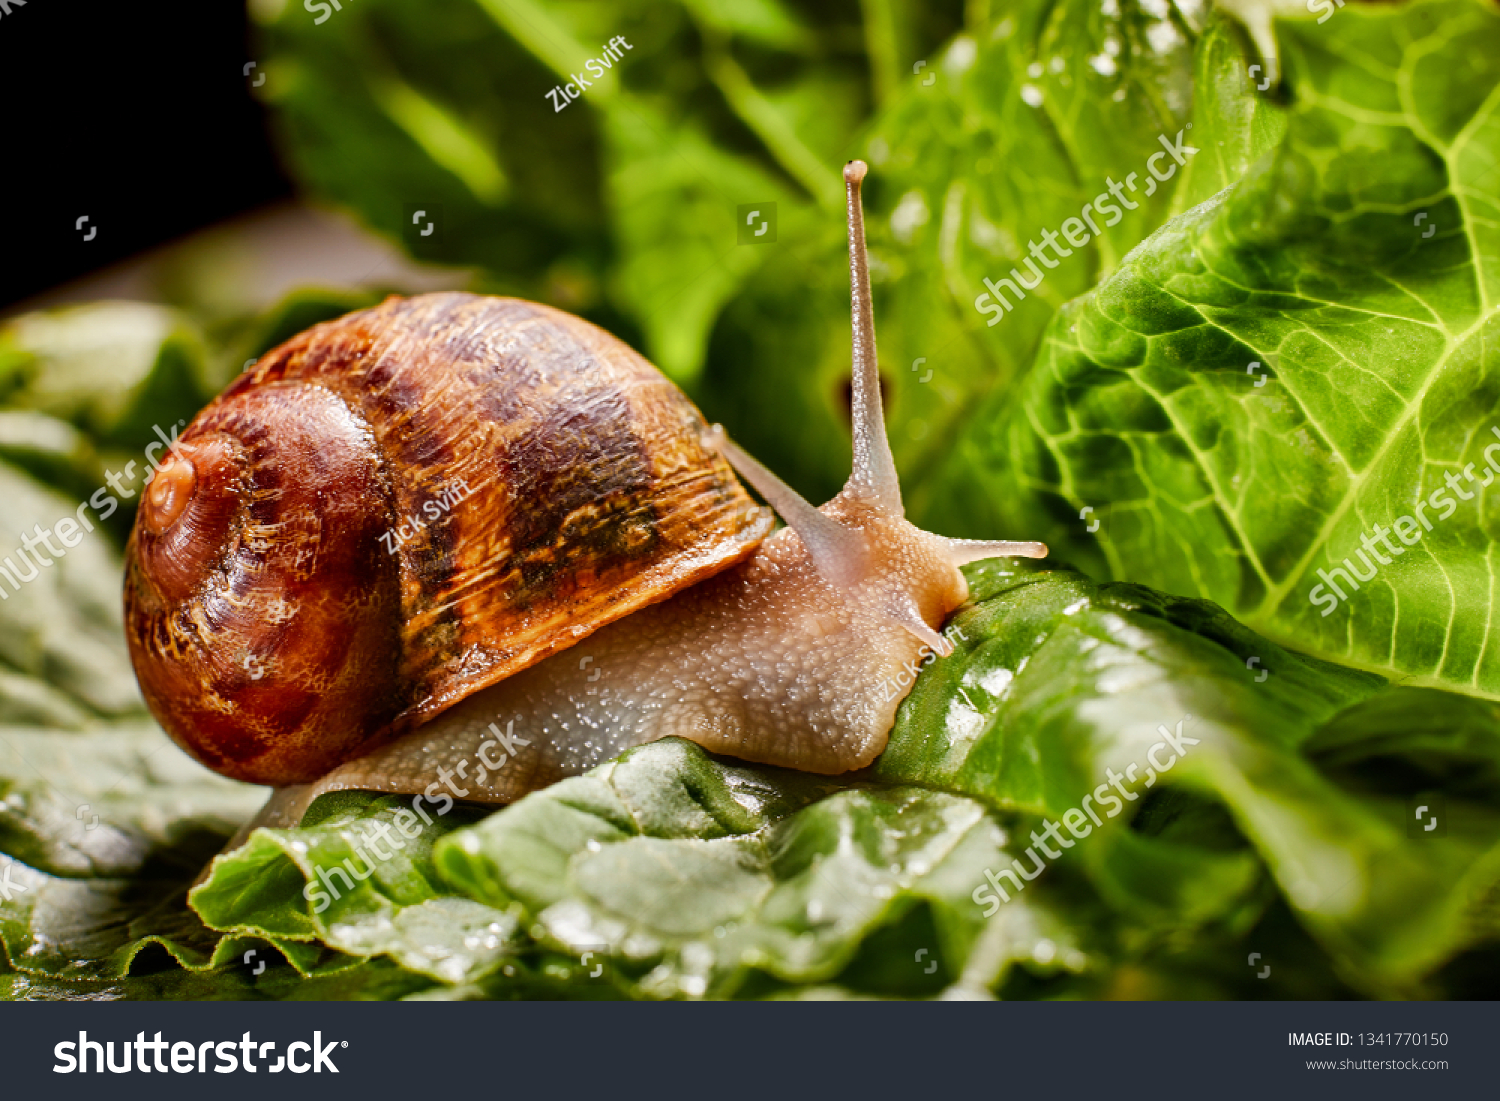 Snail Muller gliding on the wet leaves. Large white mollusk snails with brown striped shell, crawling on vegetables. Helix pomatia, Burgundy, Roman, escargot. Caviar. Kisses of snails in strawberries. #1341770150